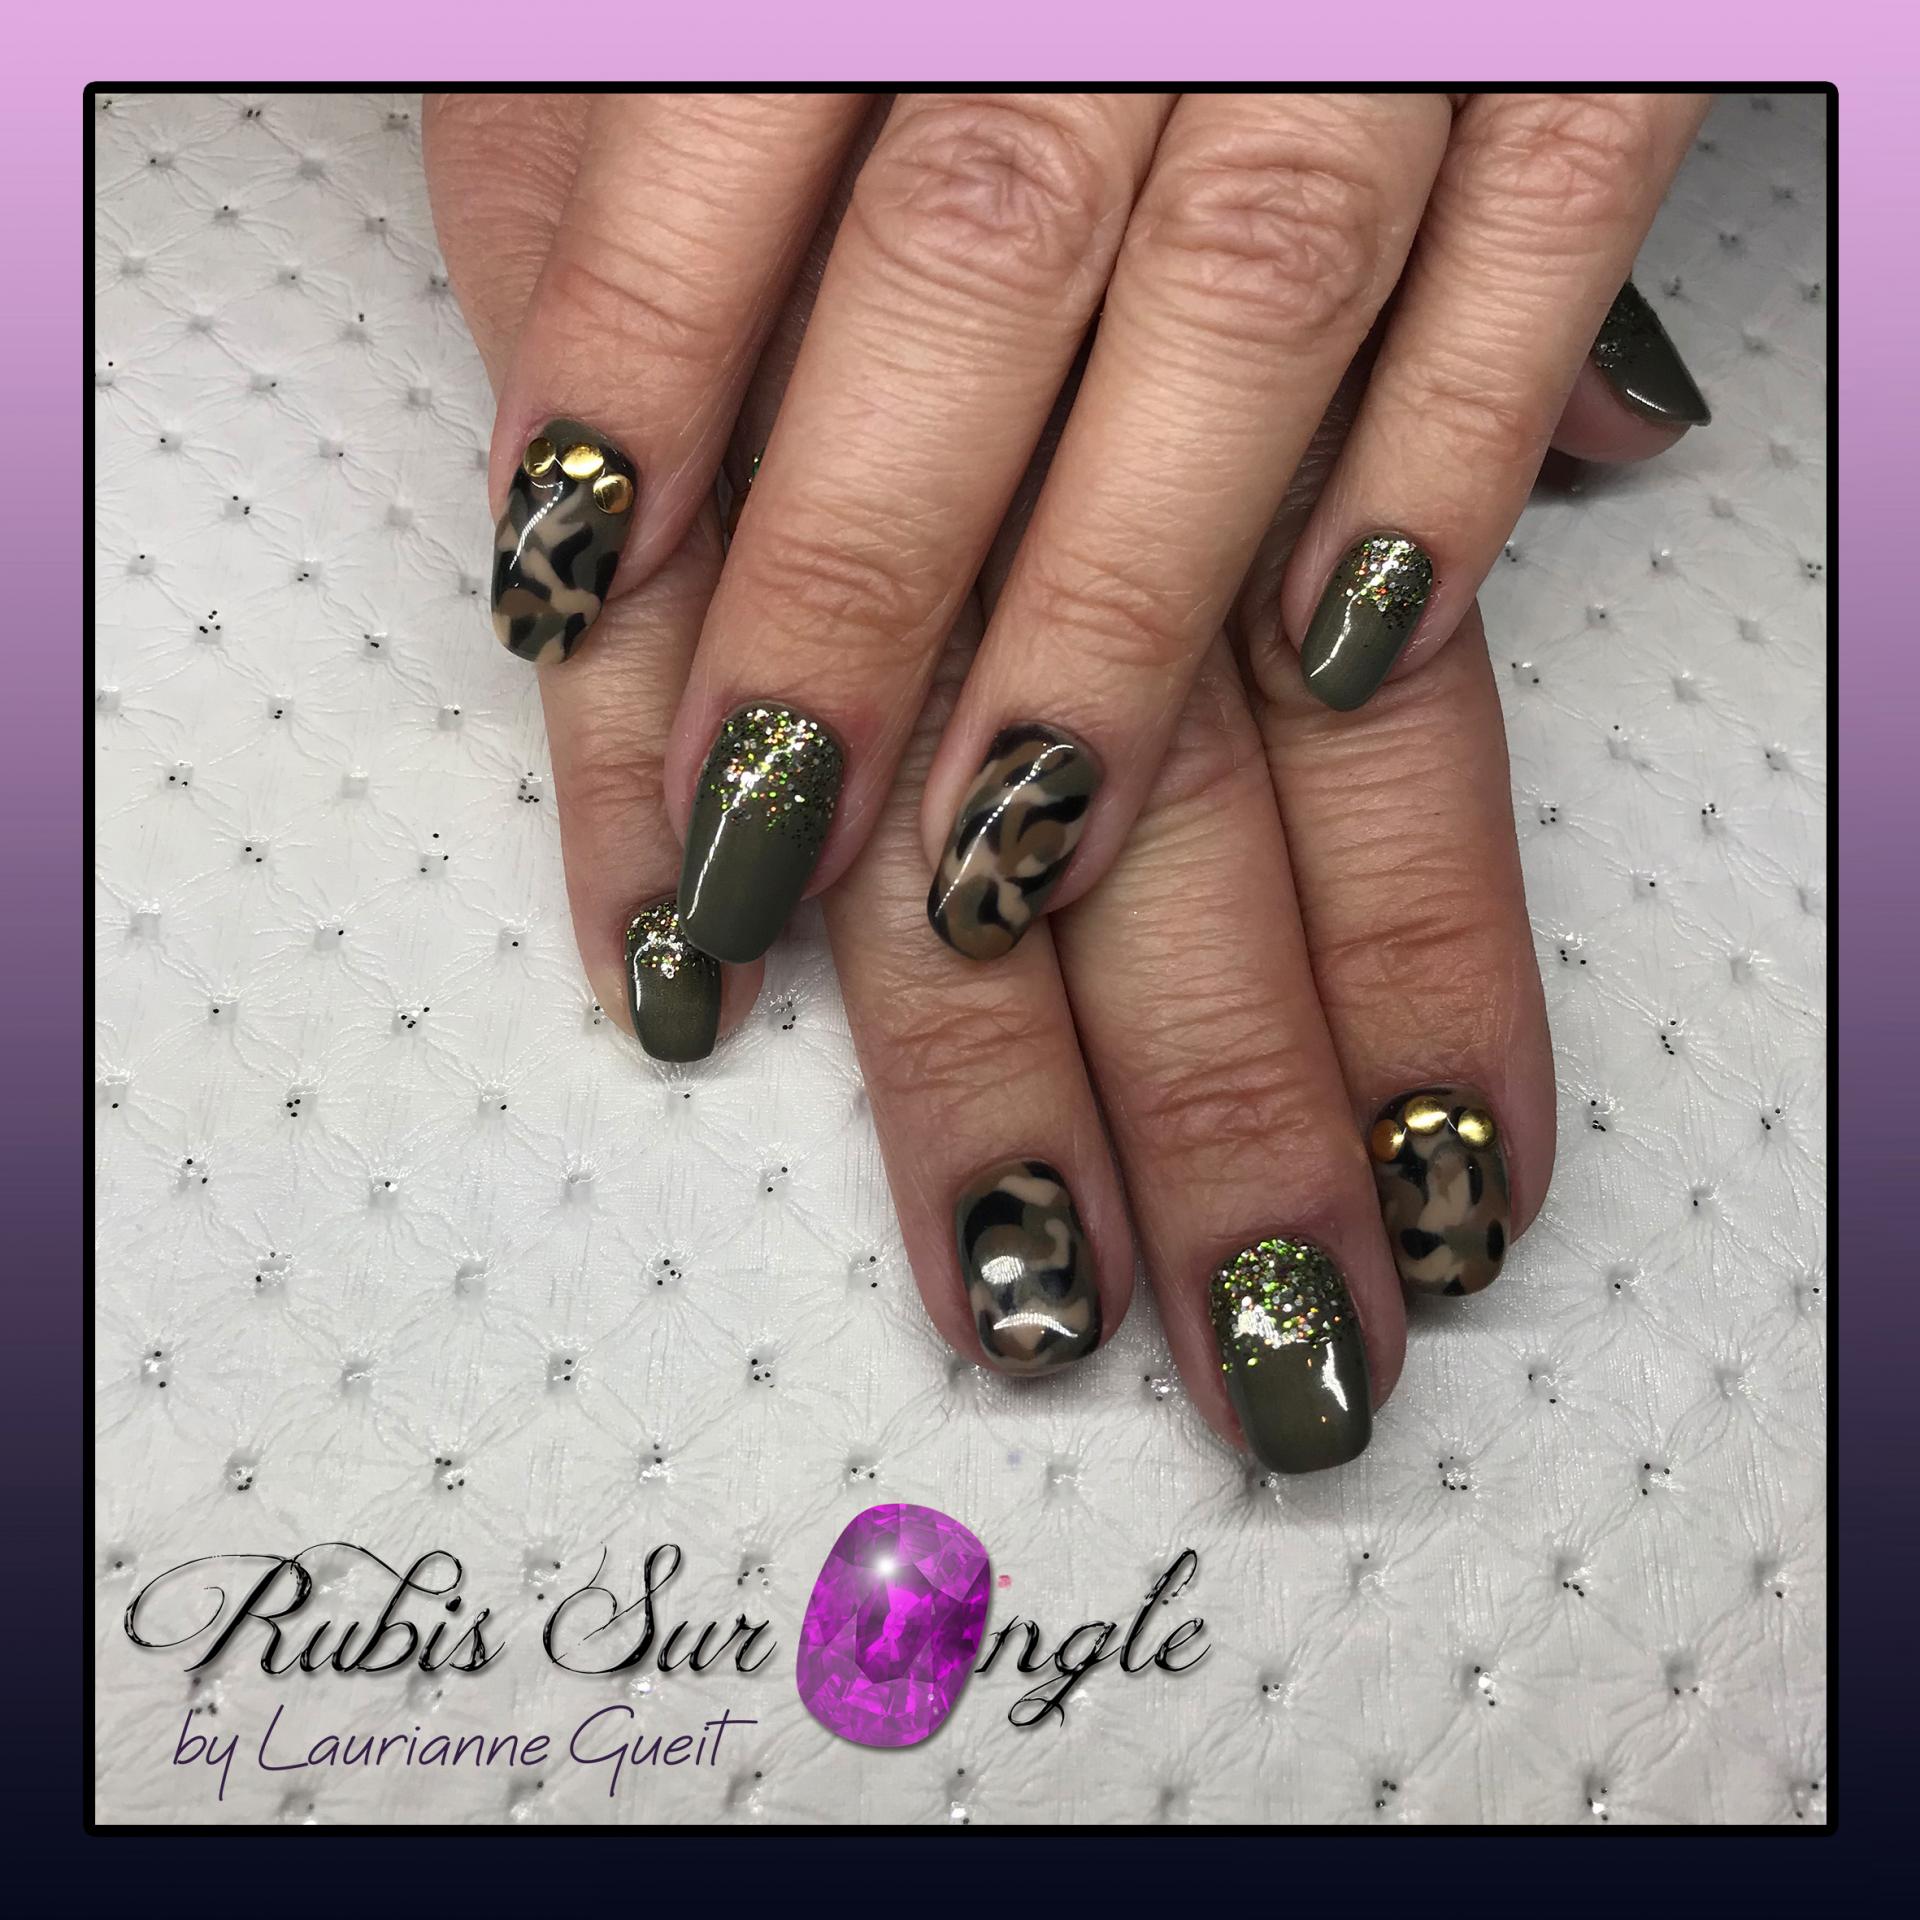 Rubis Sur Ongle Manucure Camouflage